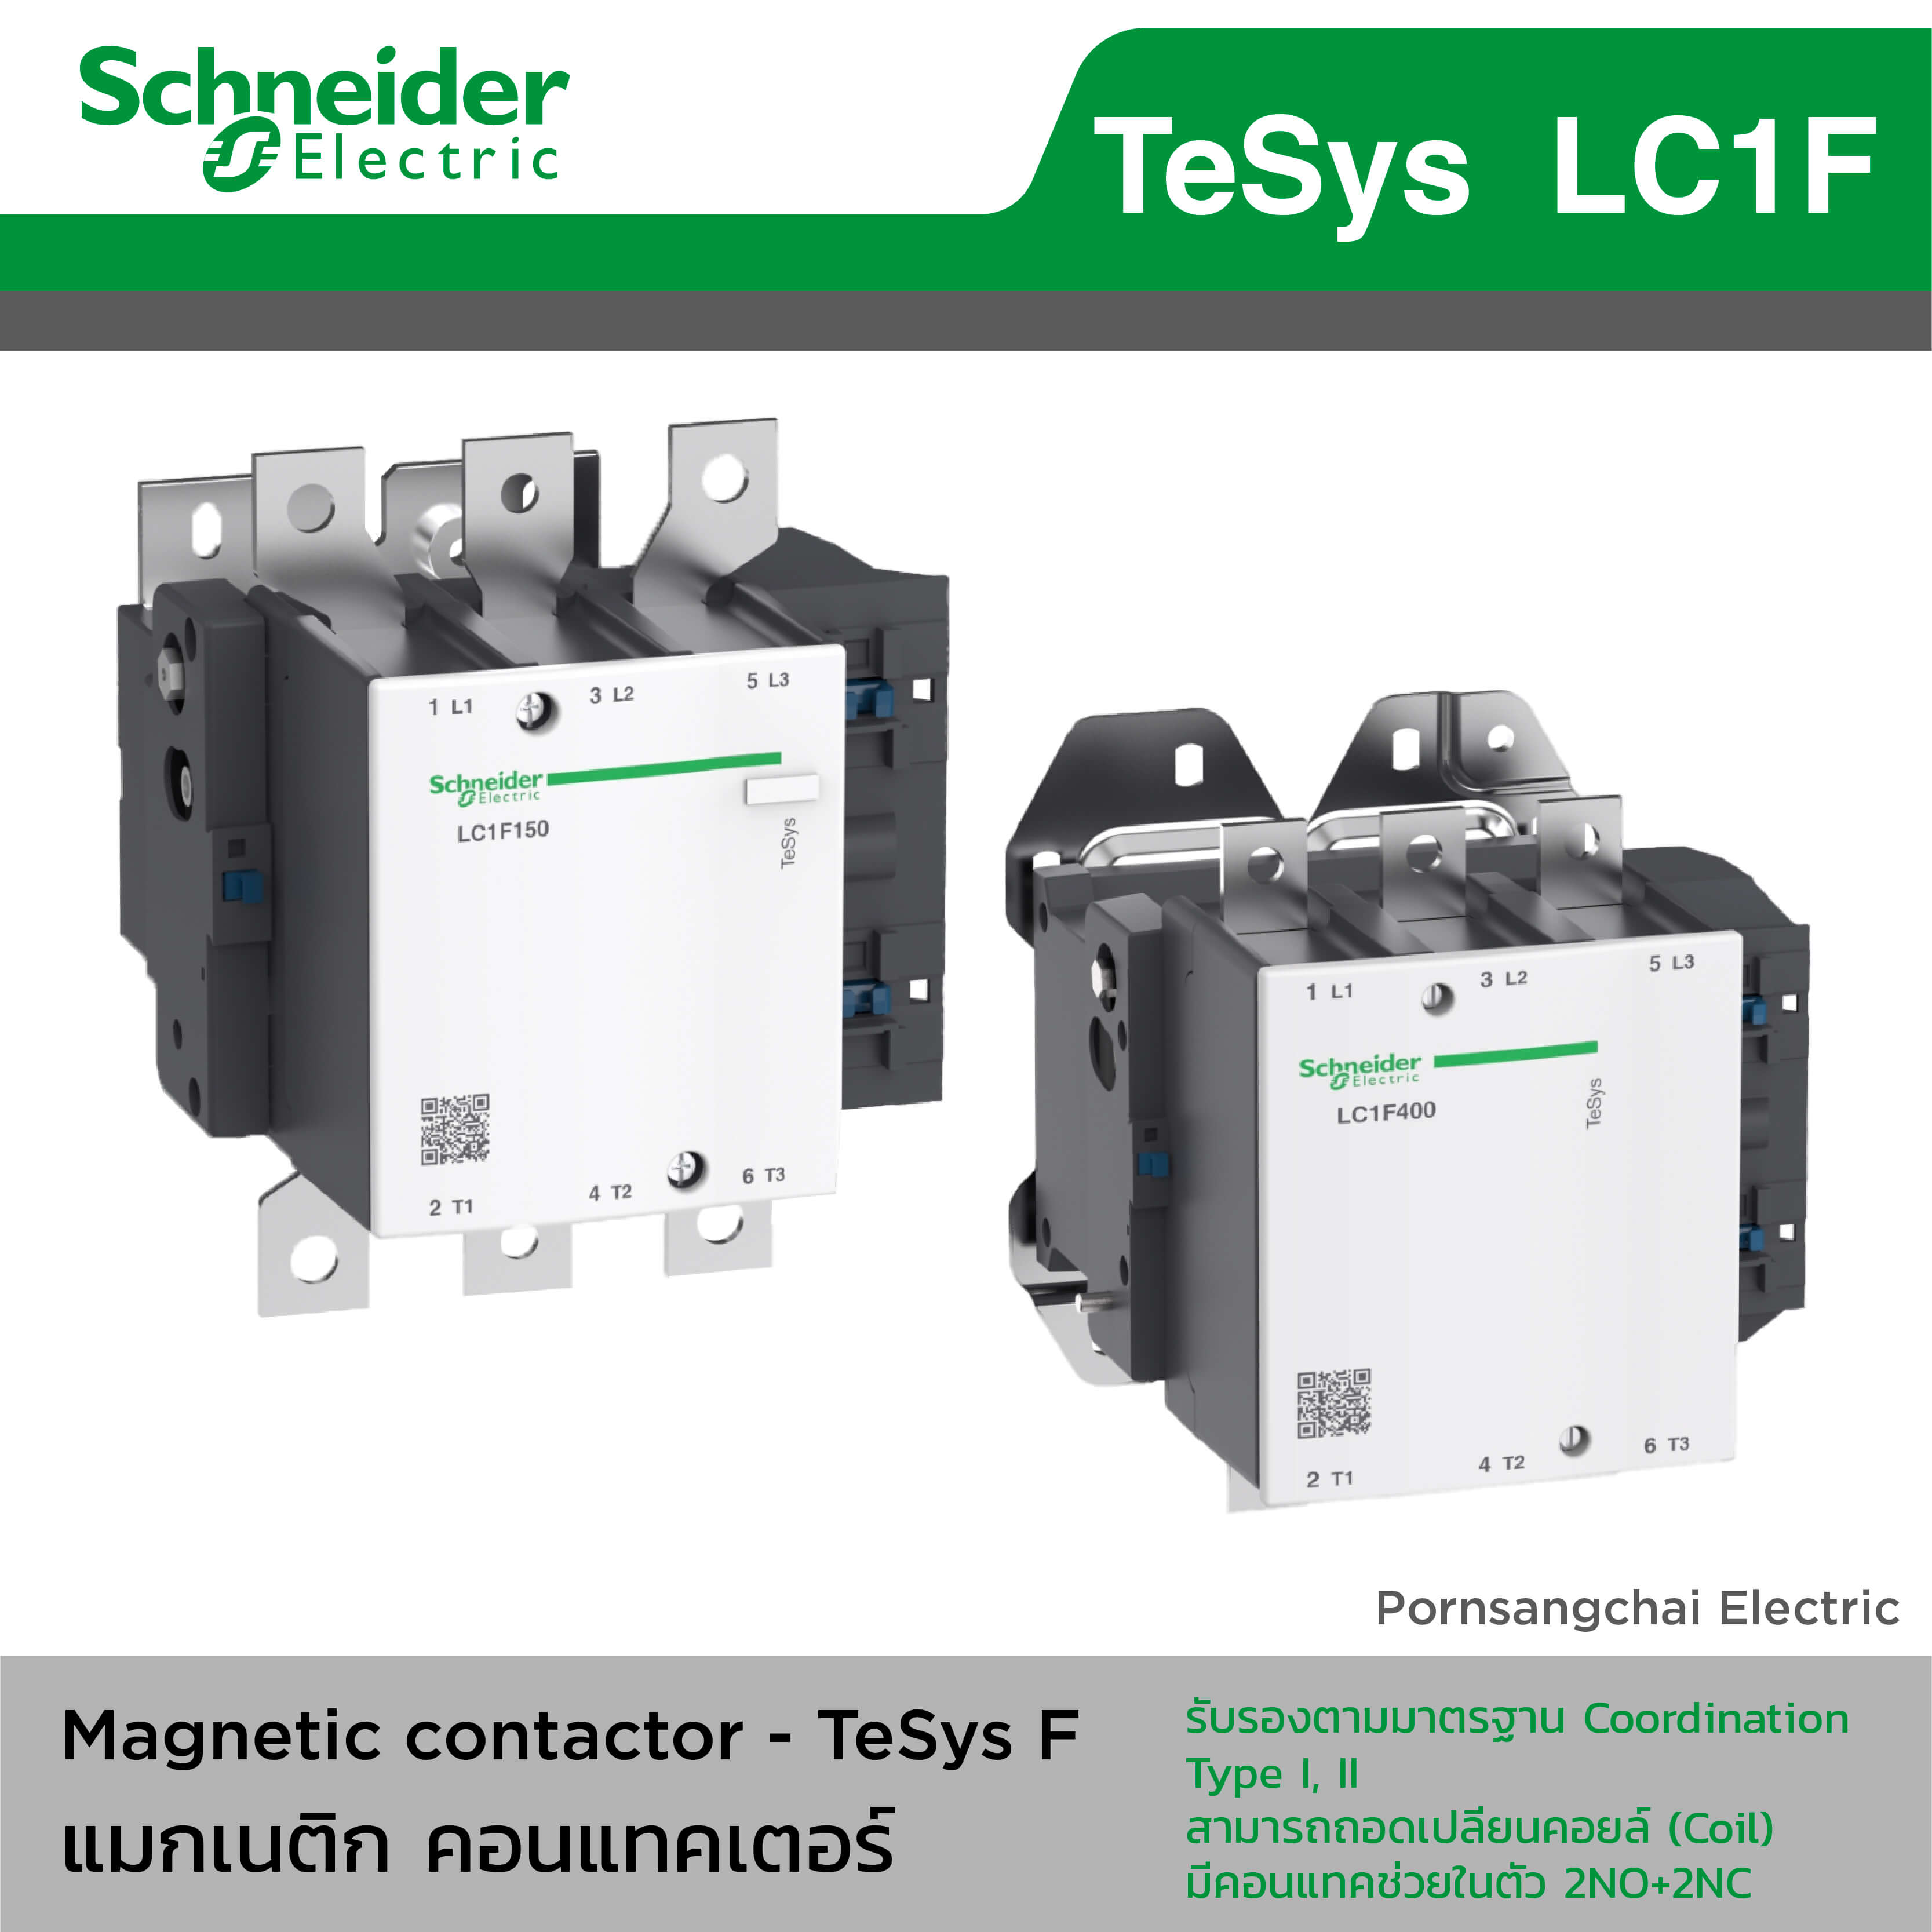 Schneider Magnetic Contactor แมกเนติก - TeSys F (LC1F)